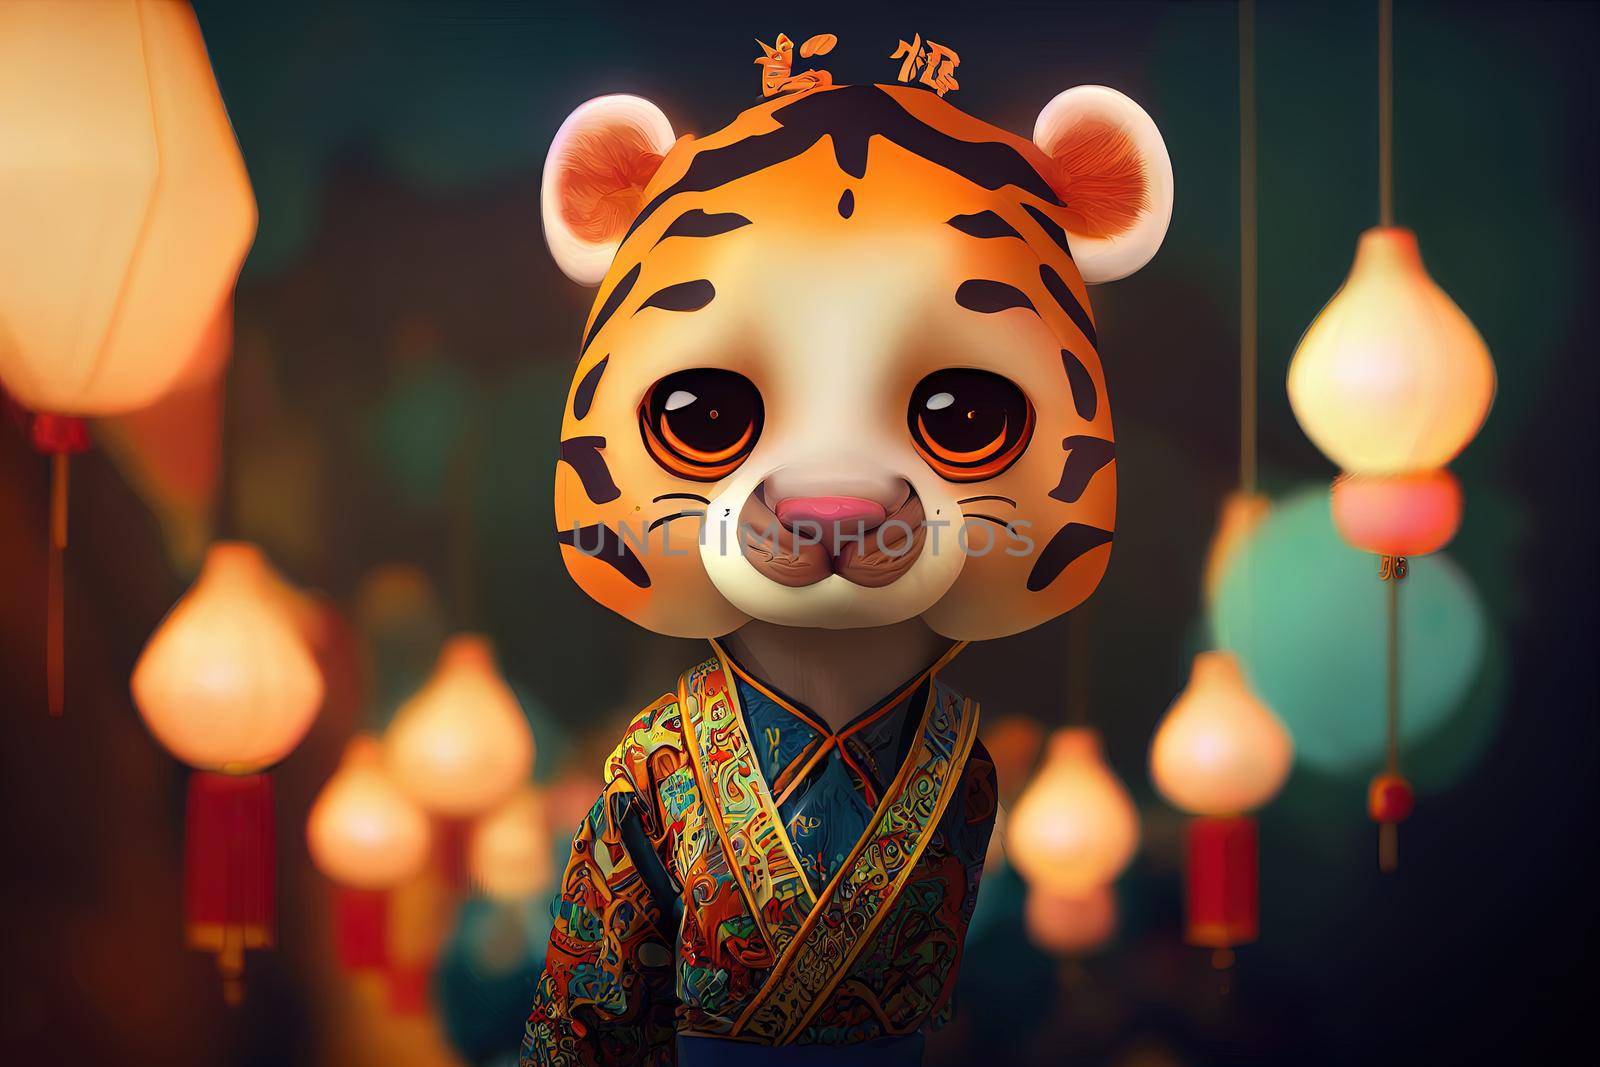 Cute cartoon image design, anthropomorphic tiger, wearing traditional Chinese costumes, cute, 3D doll